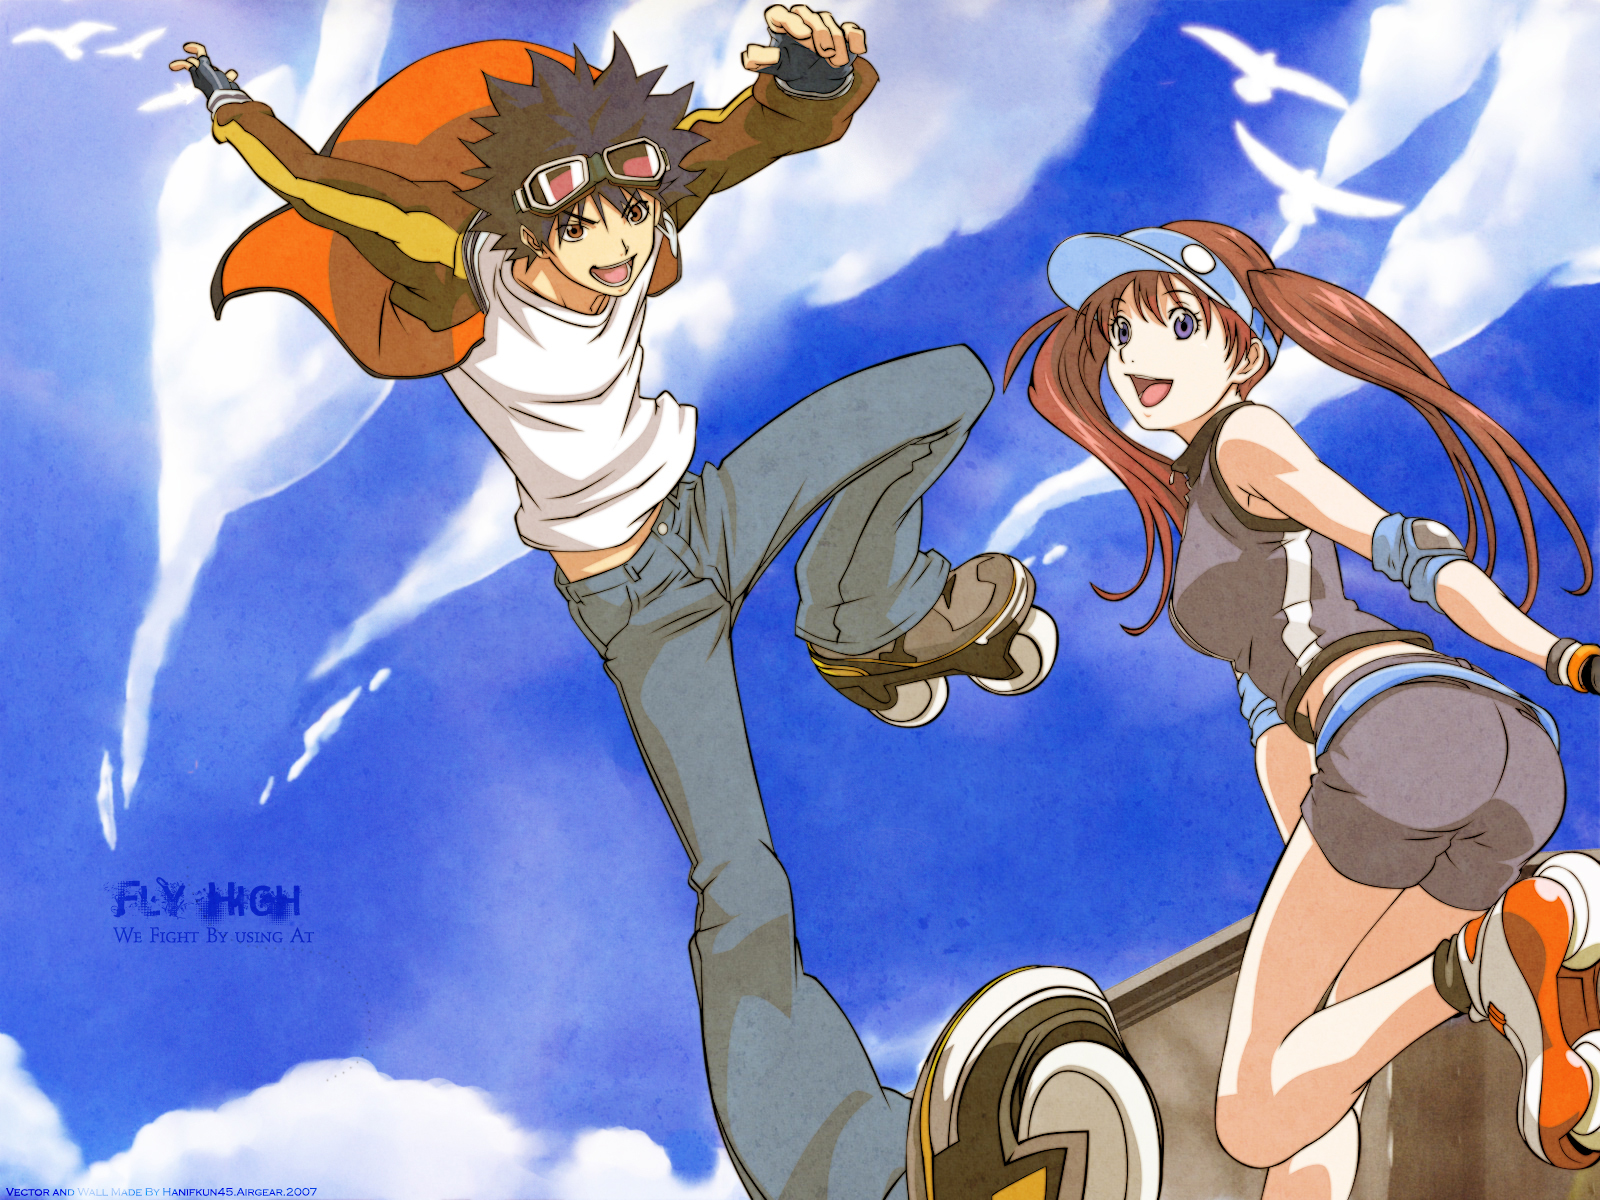 Colorful artwork featuring characters from the popular anime series Air Gear, perfect for your desktop.